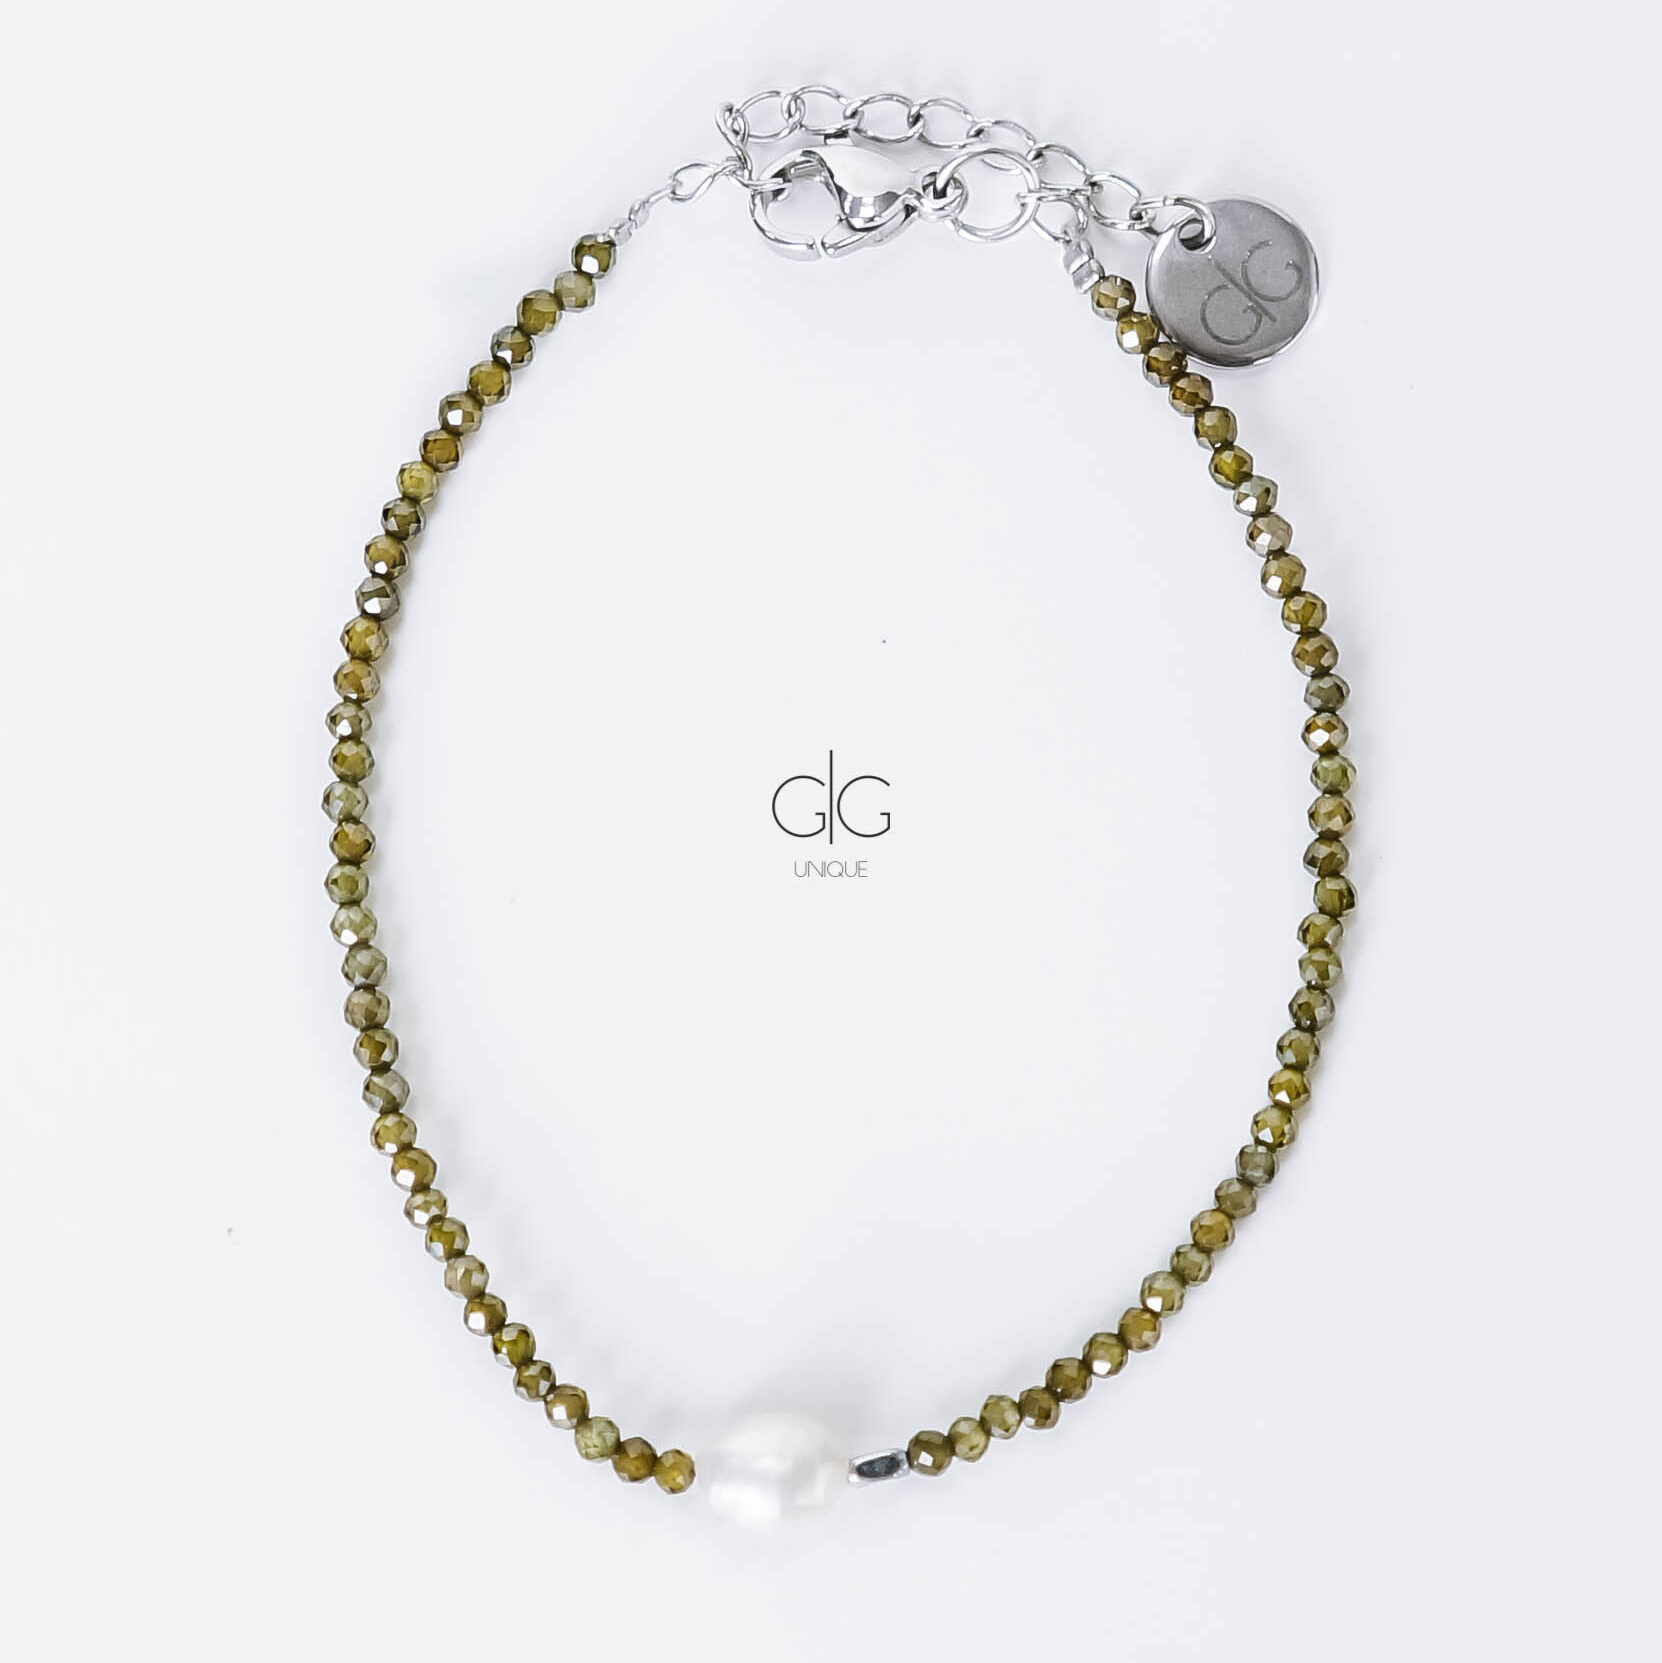 Green zircon bracelet with hematite and freshwater pearl – GG UNIQUE